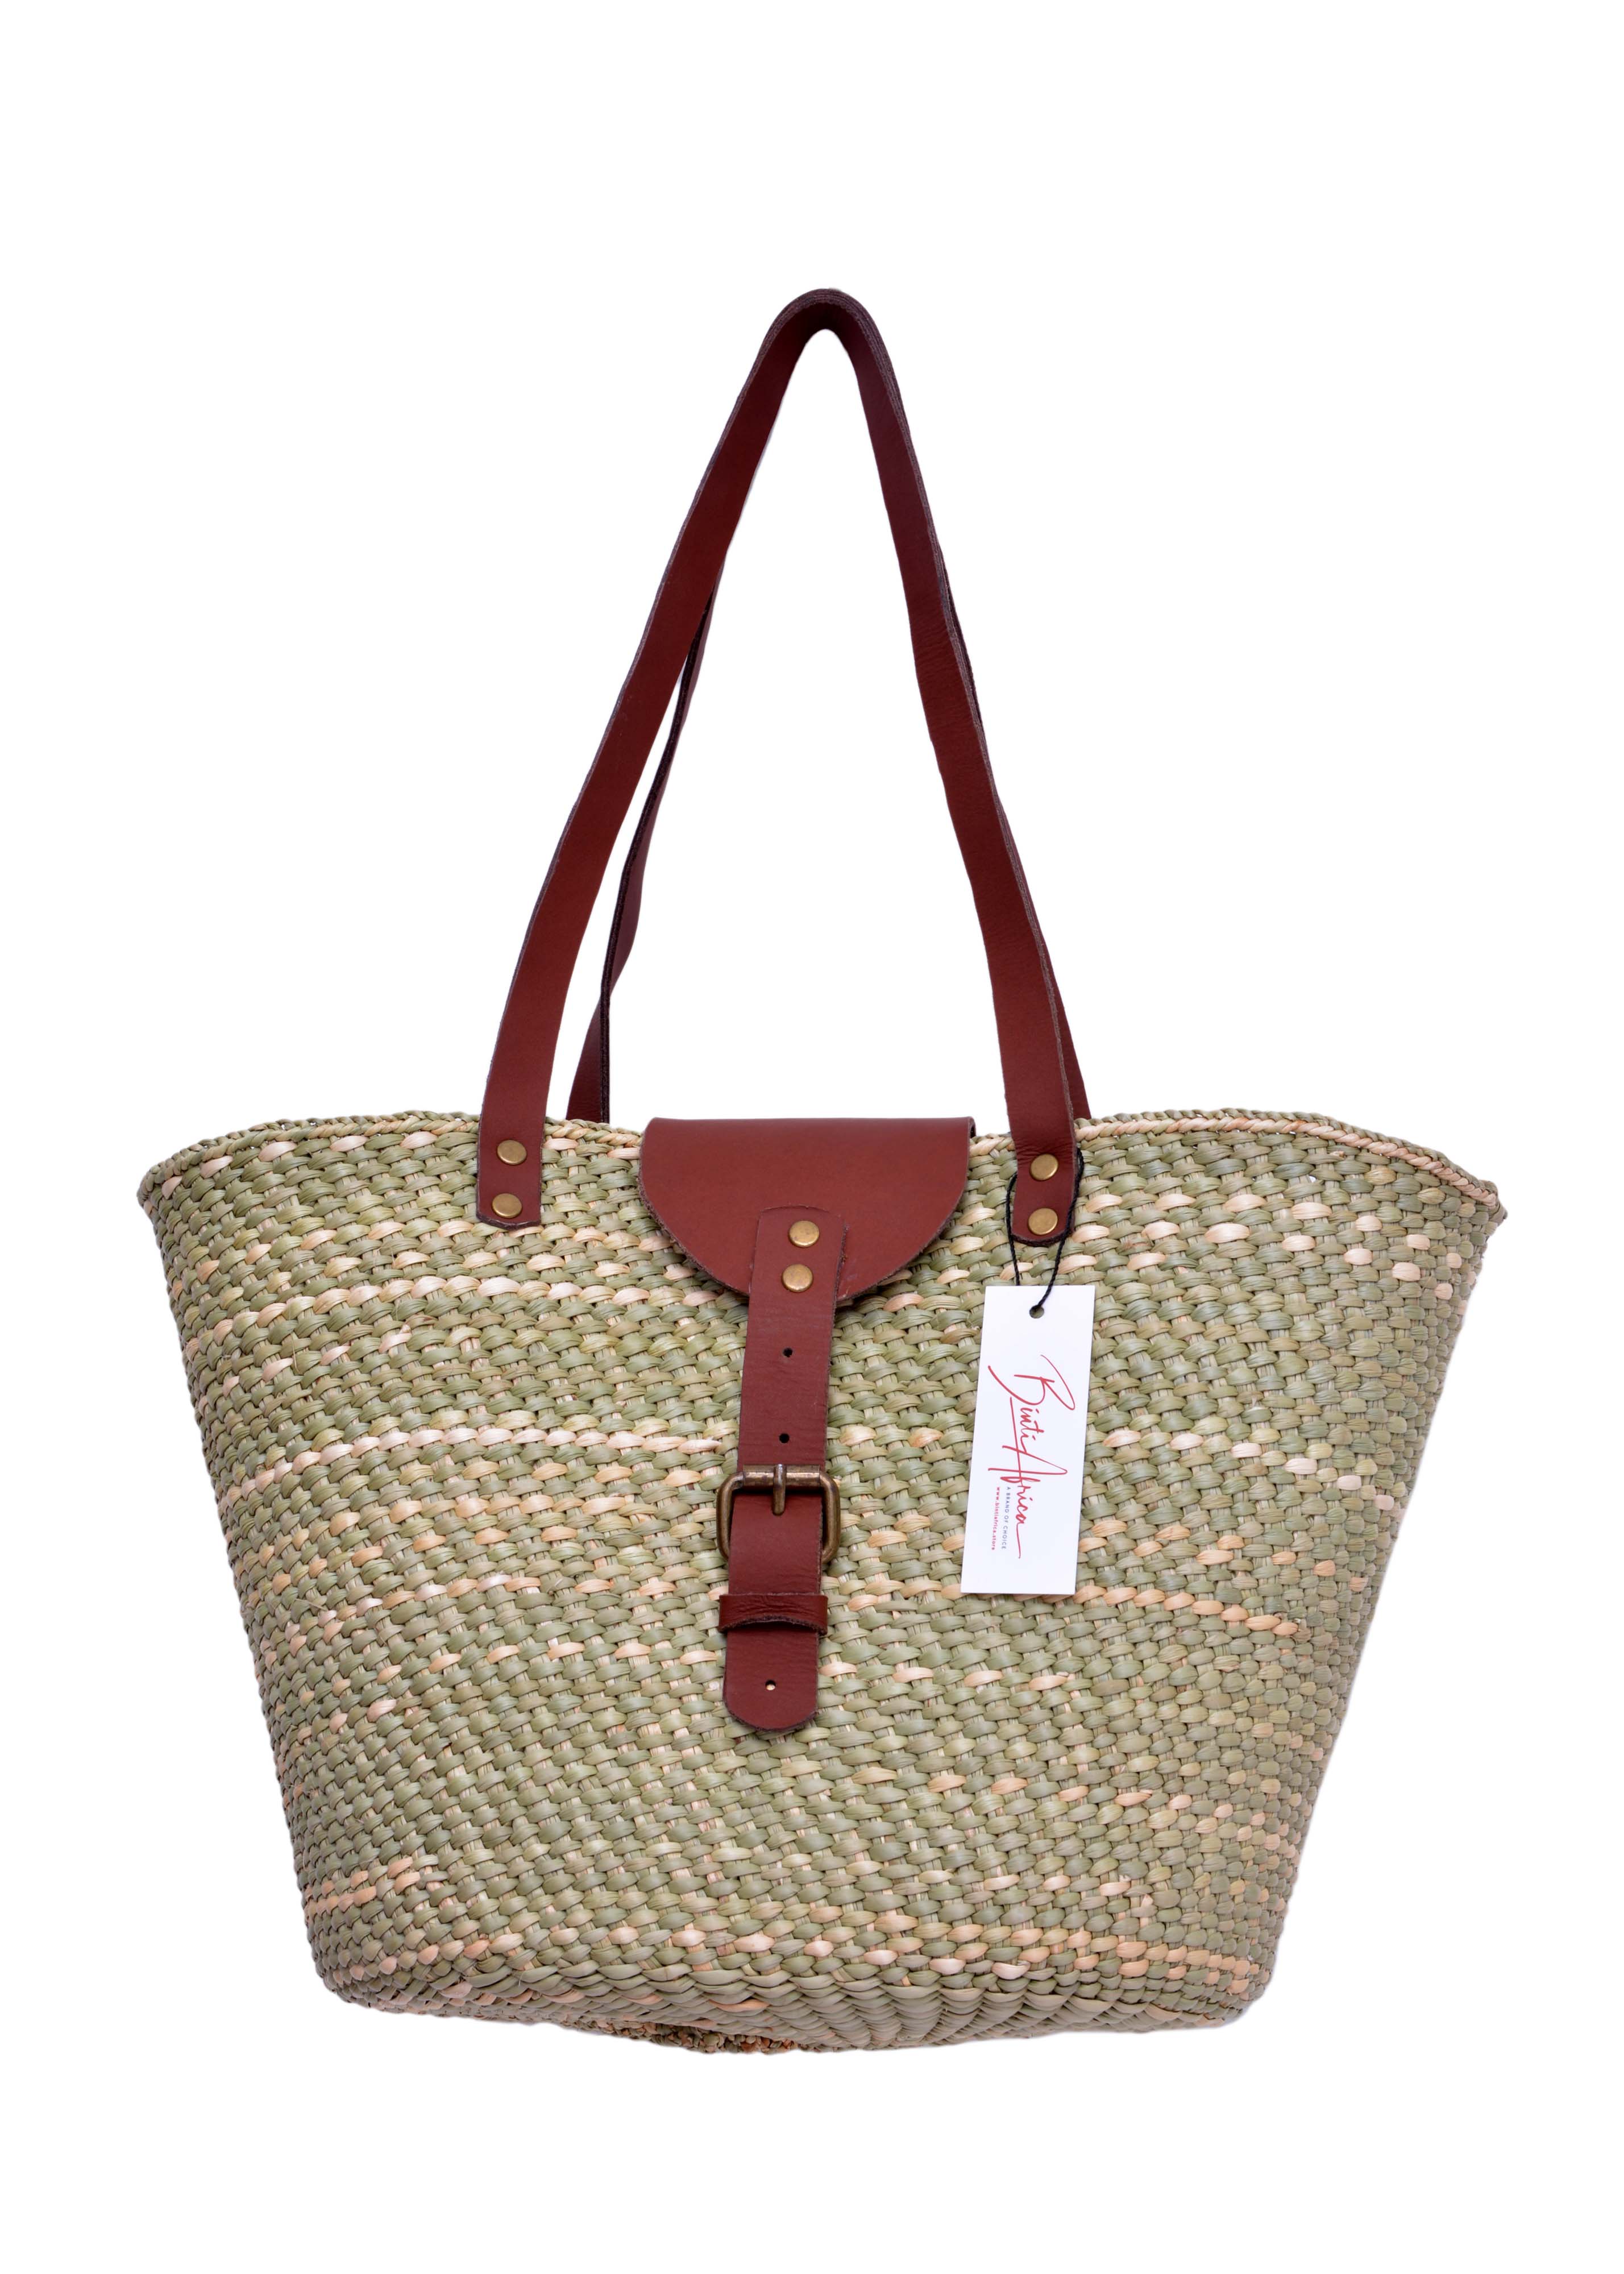 KITEZO Plain Everyday Use Handmade African Basket:Perfect for Vacations and Beach Travel